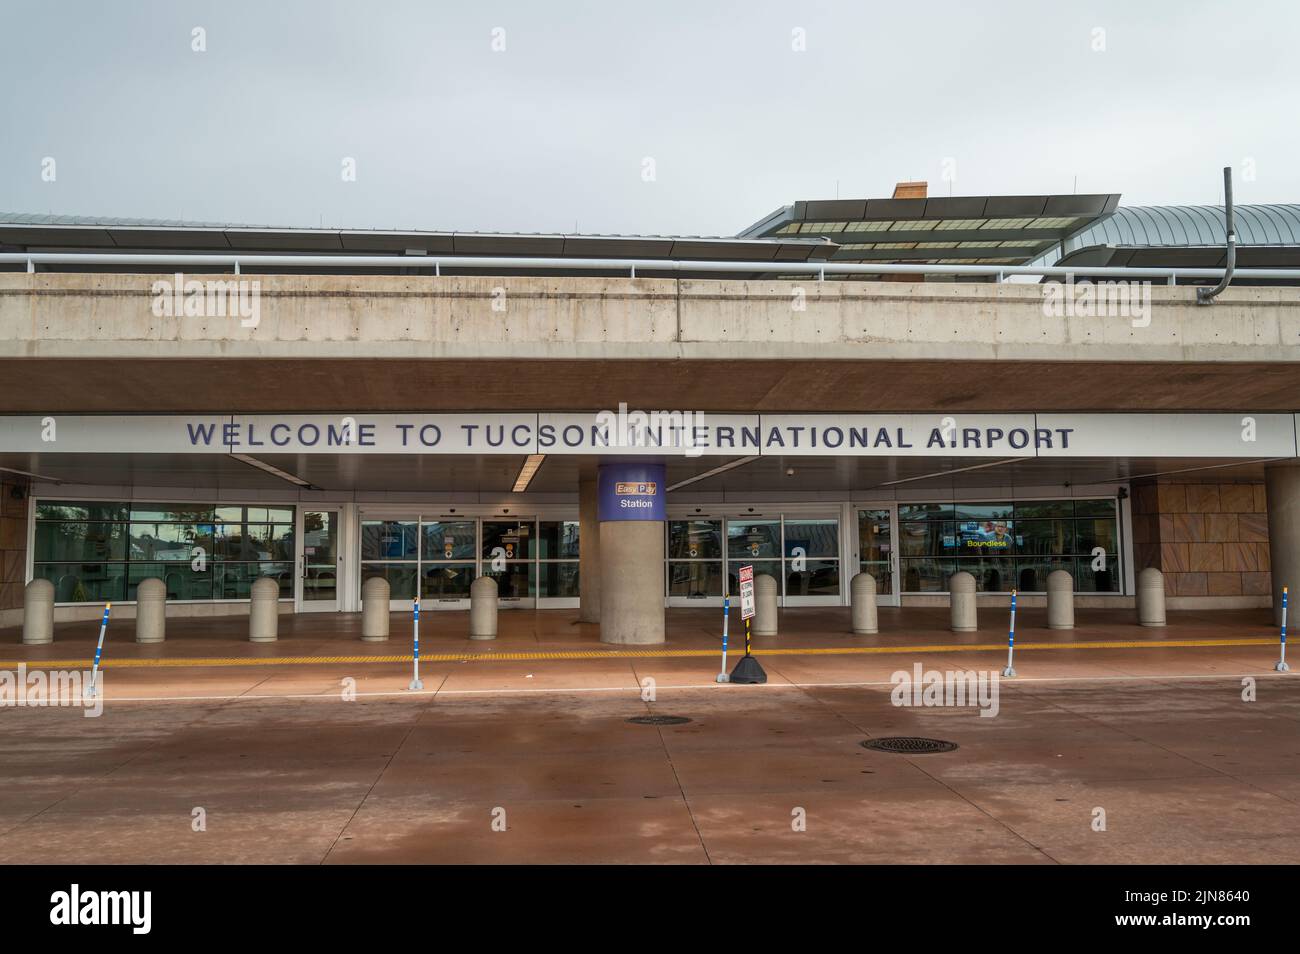 Welcome to Tucson International Airport, written on building. Stock Photo